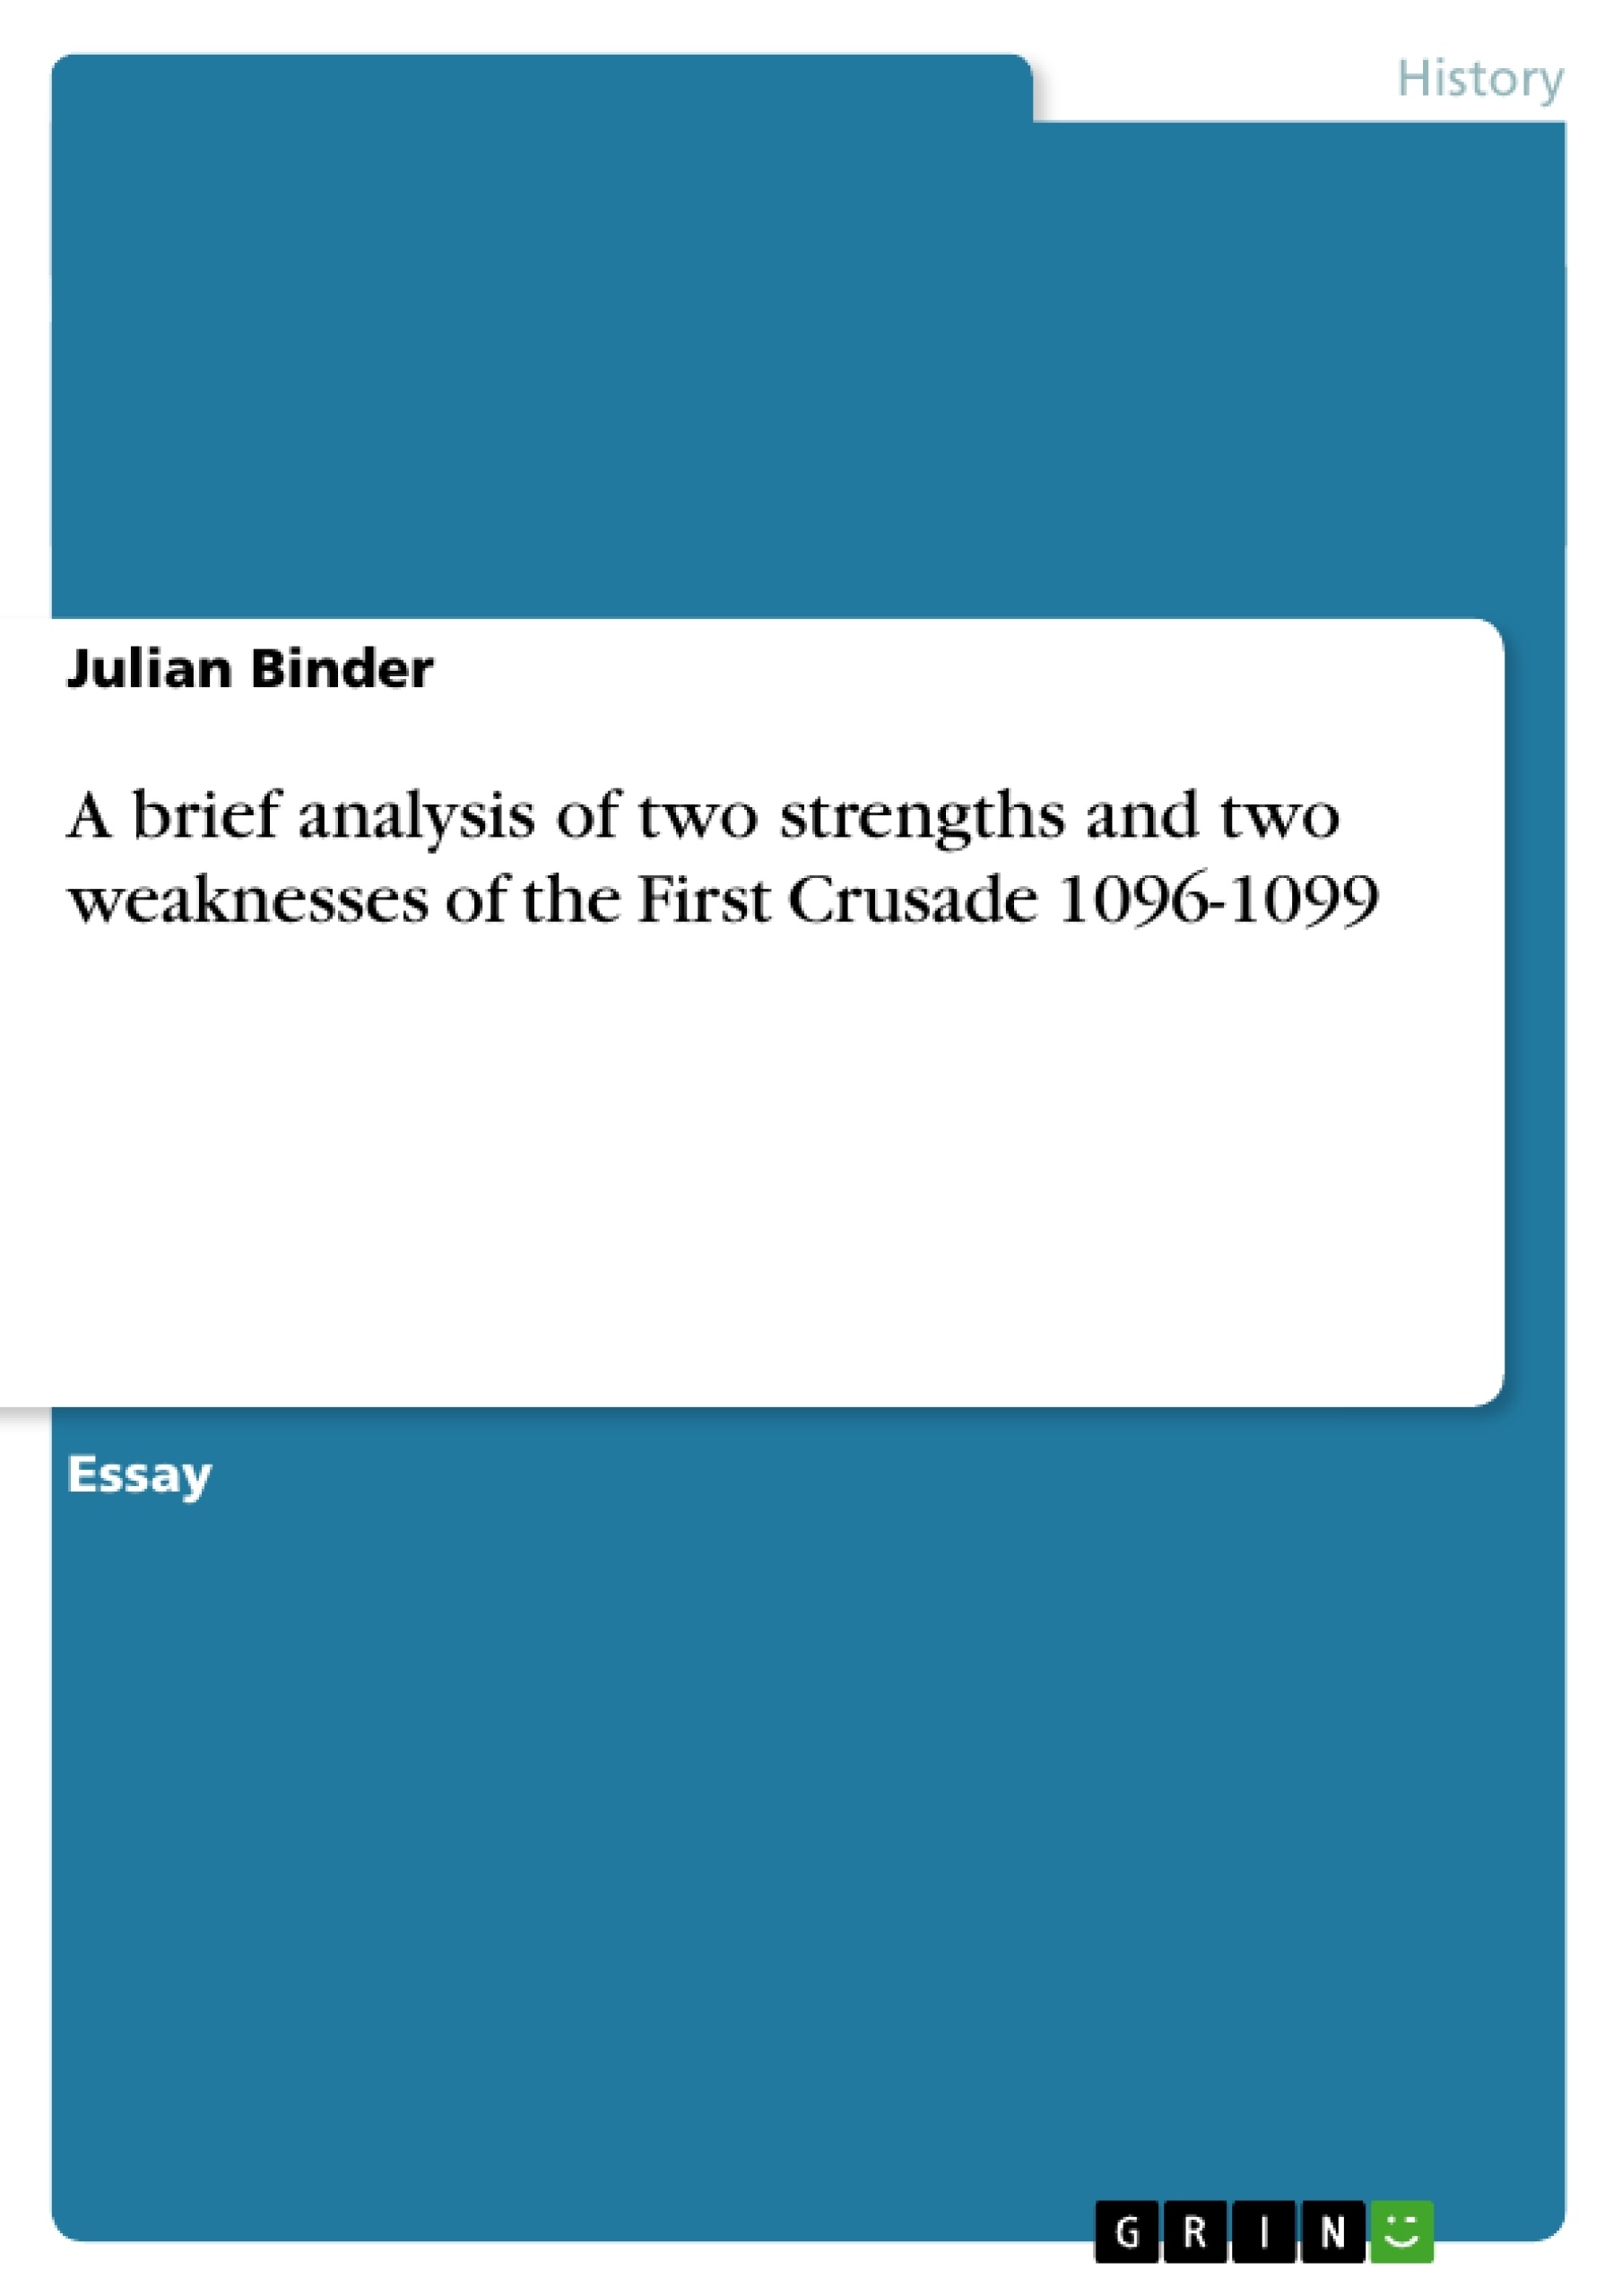 Título: A brief analysis of two strengths and two weaknesses of the First Crusade 1096-1099